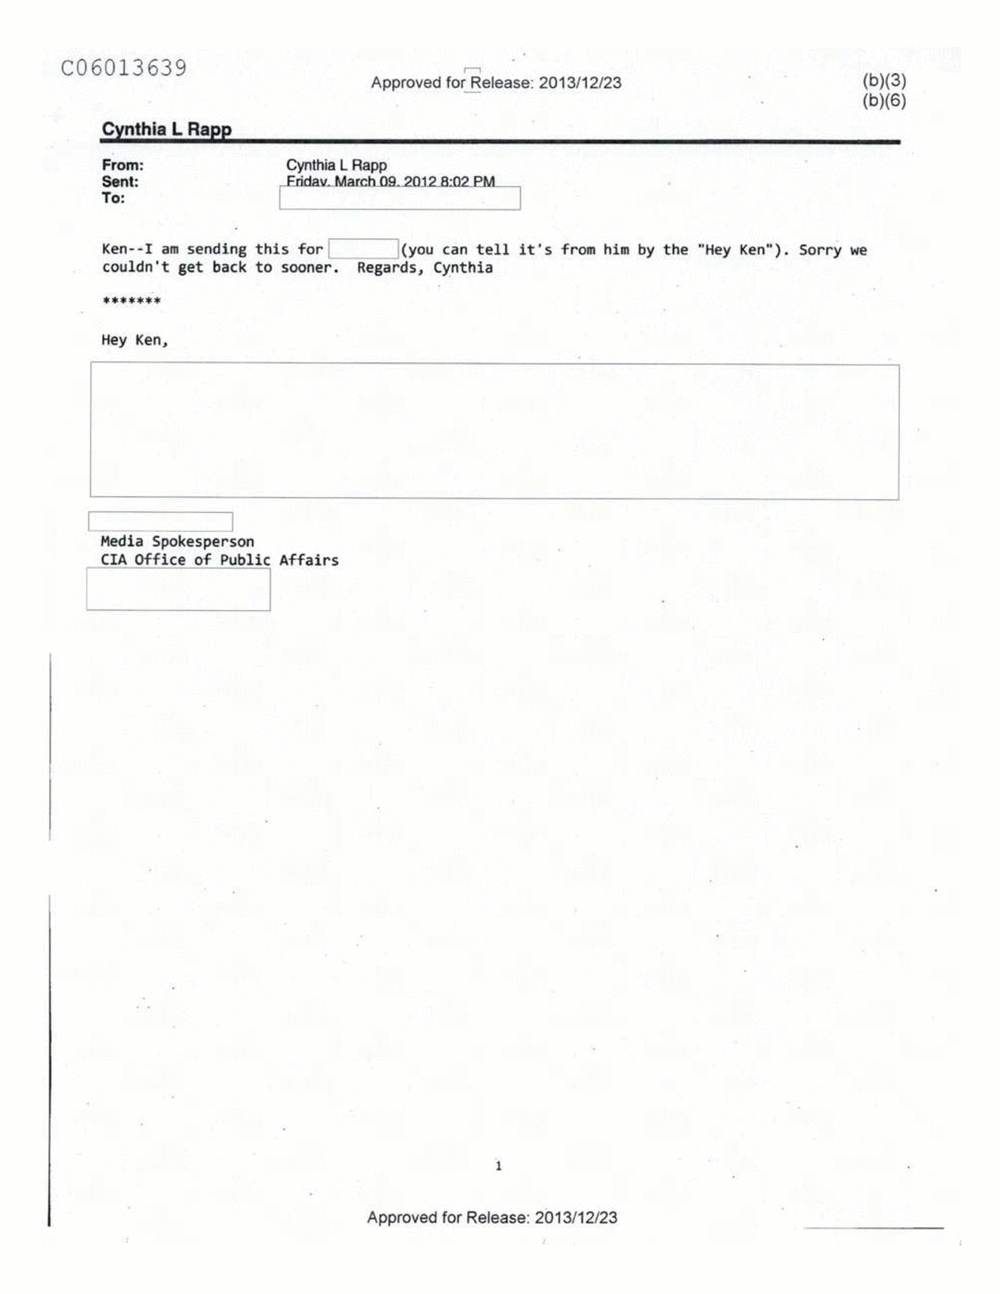 Page 478 from Email Correspondence Between Reporters and CIA Flacks